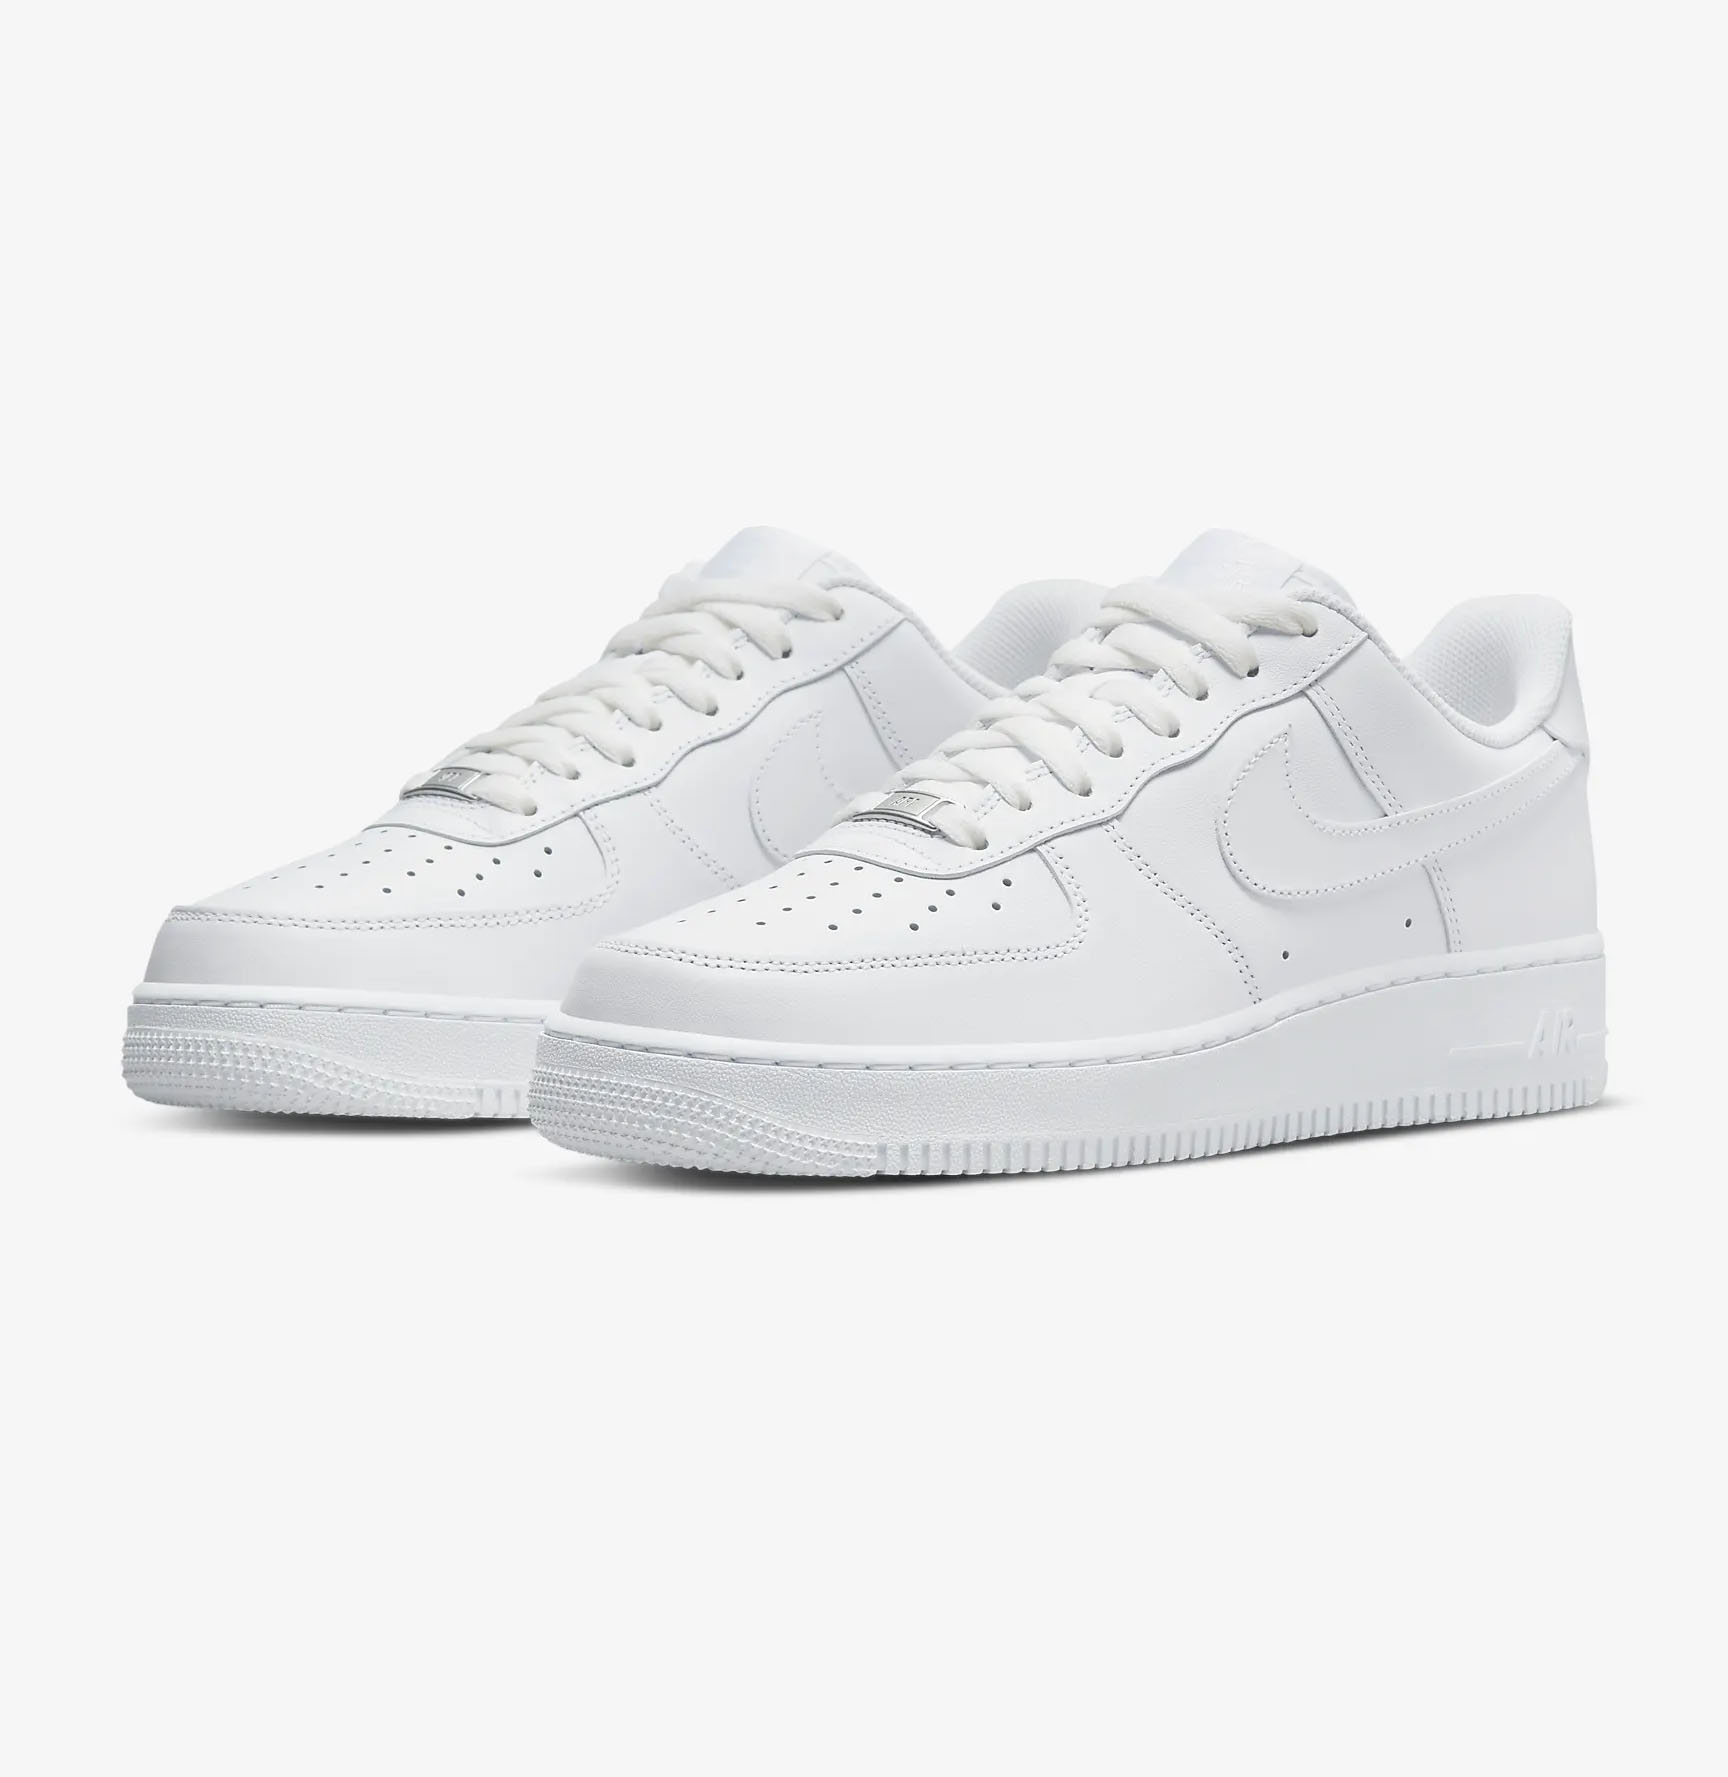 Nike Air Force1 - Create, design your own